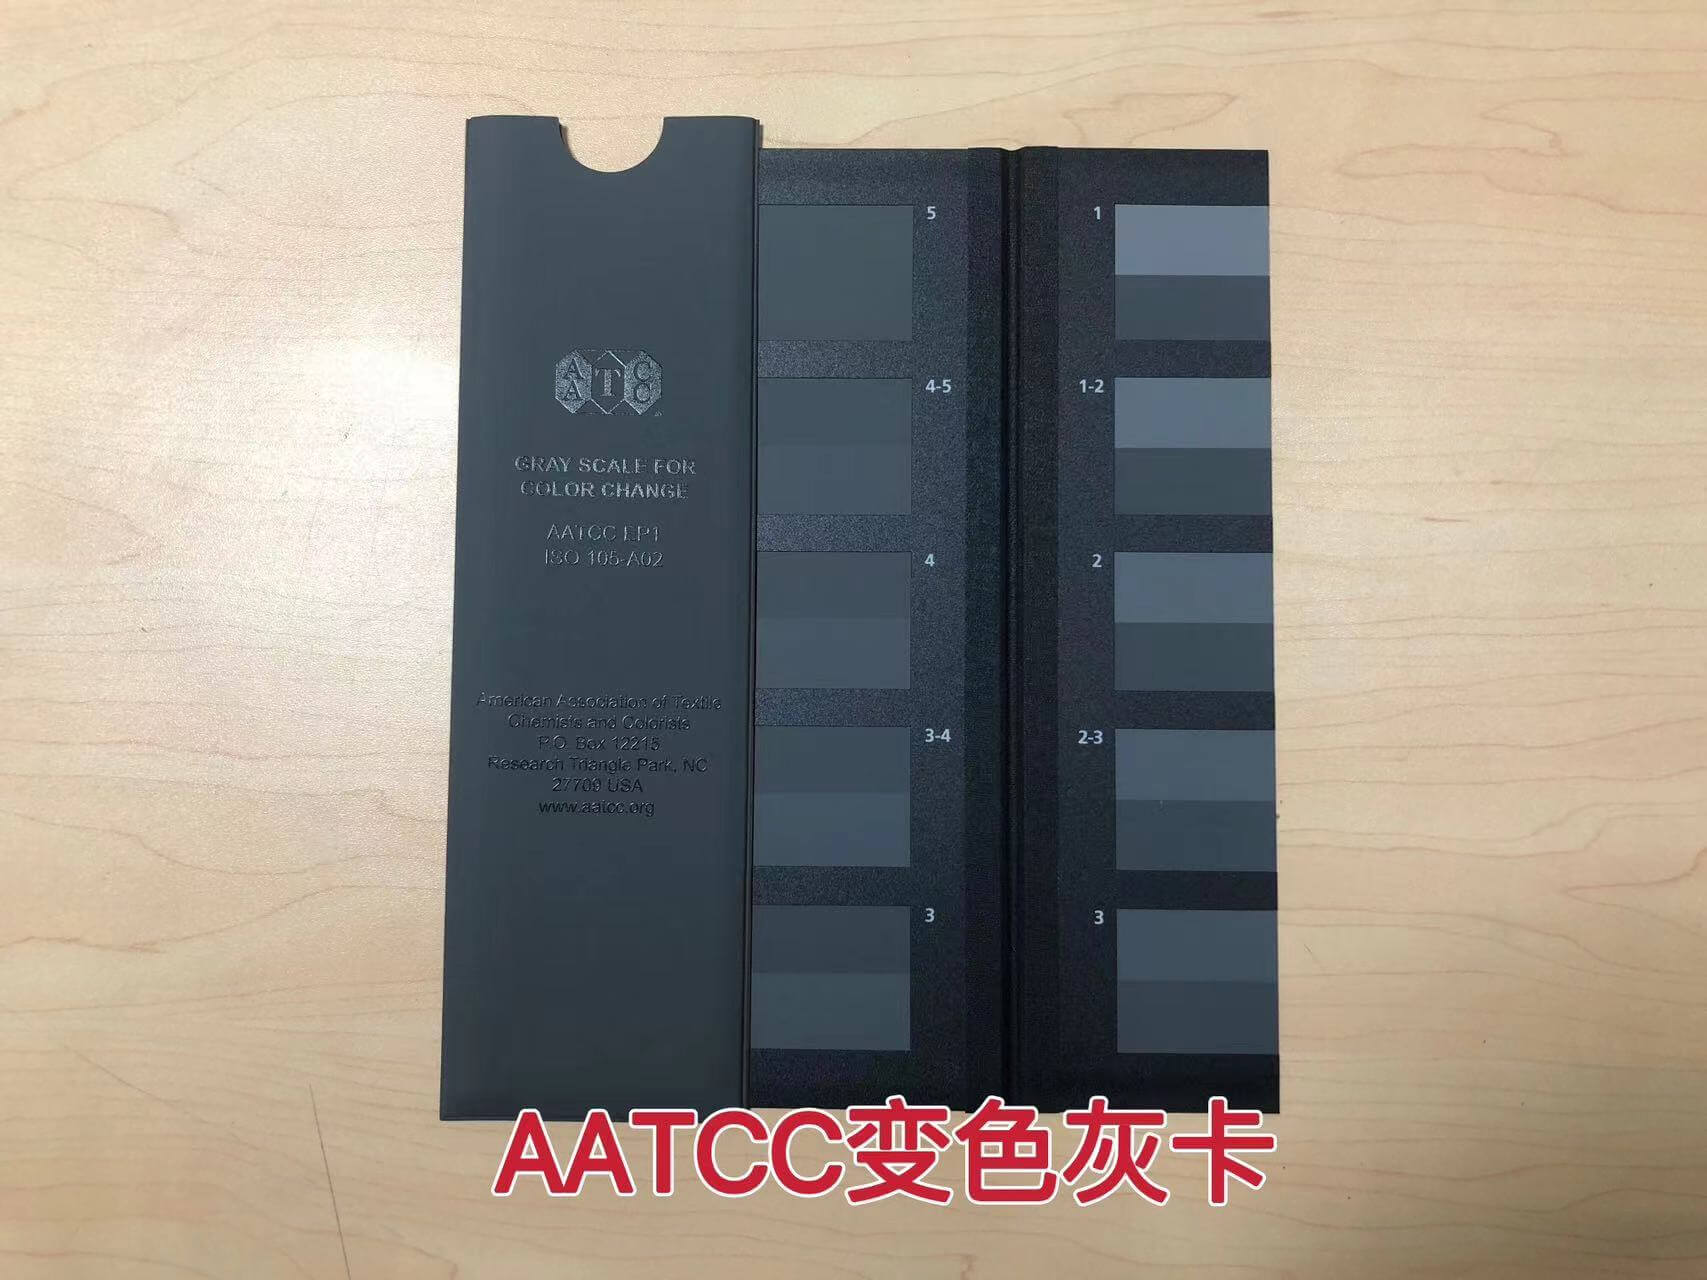 AATCC Gray Scale for Color Change TN-C02A.Grey Scales is used for assessment of color change or staining in colour fastness testing1-5 steps with half steps.